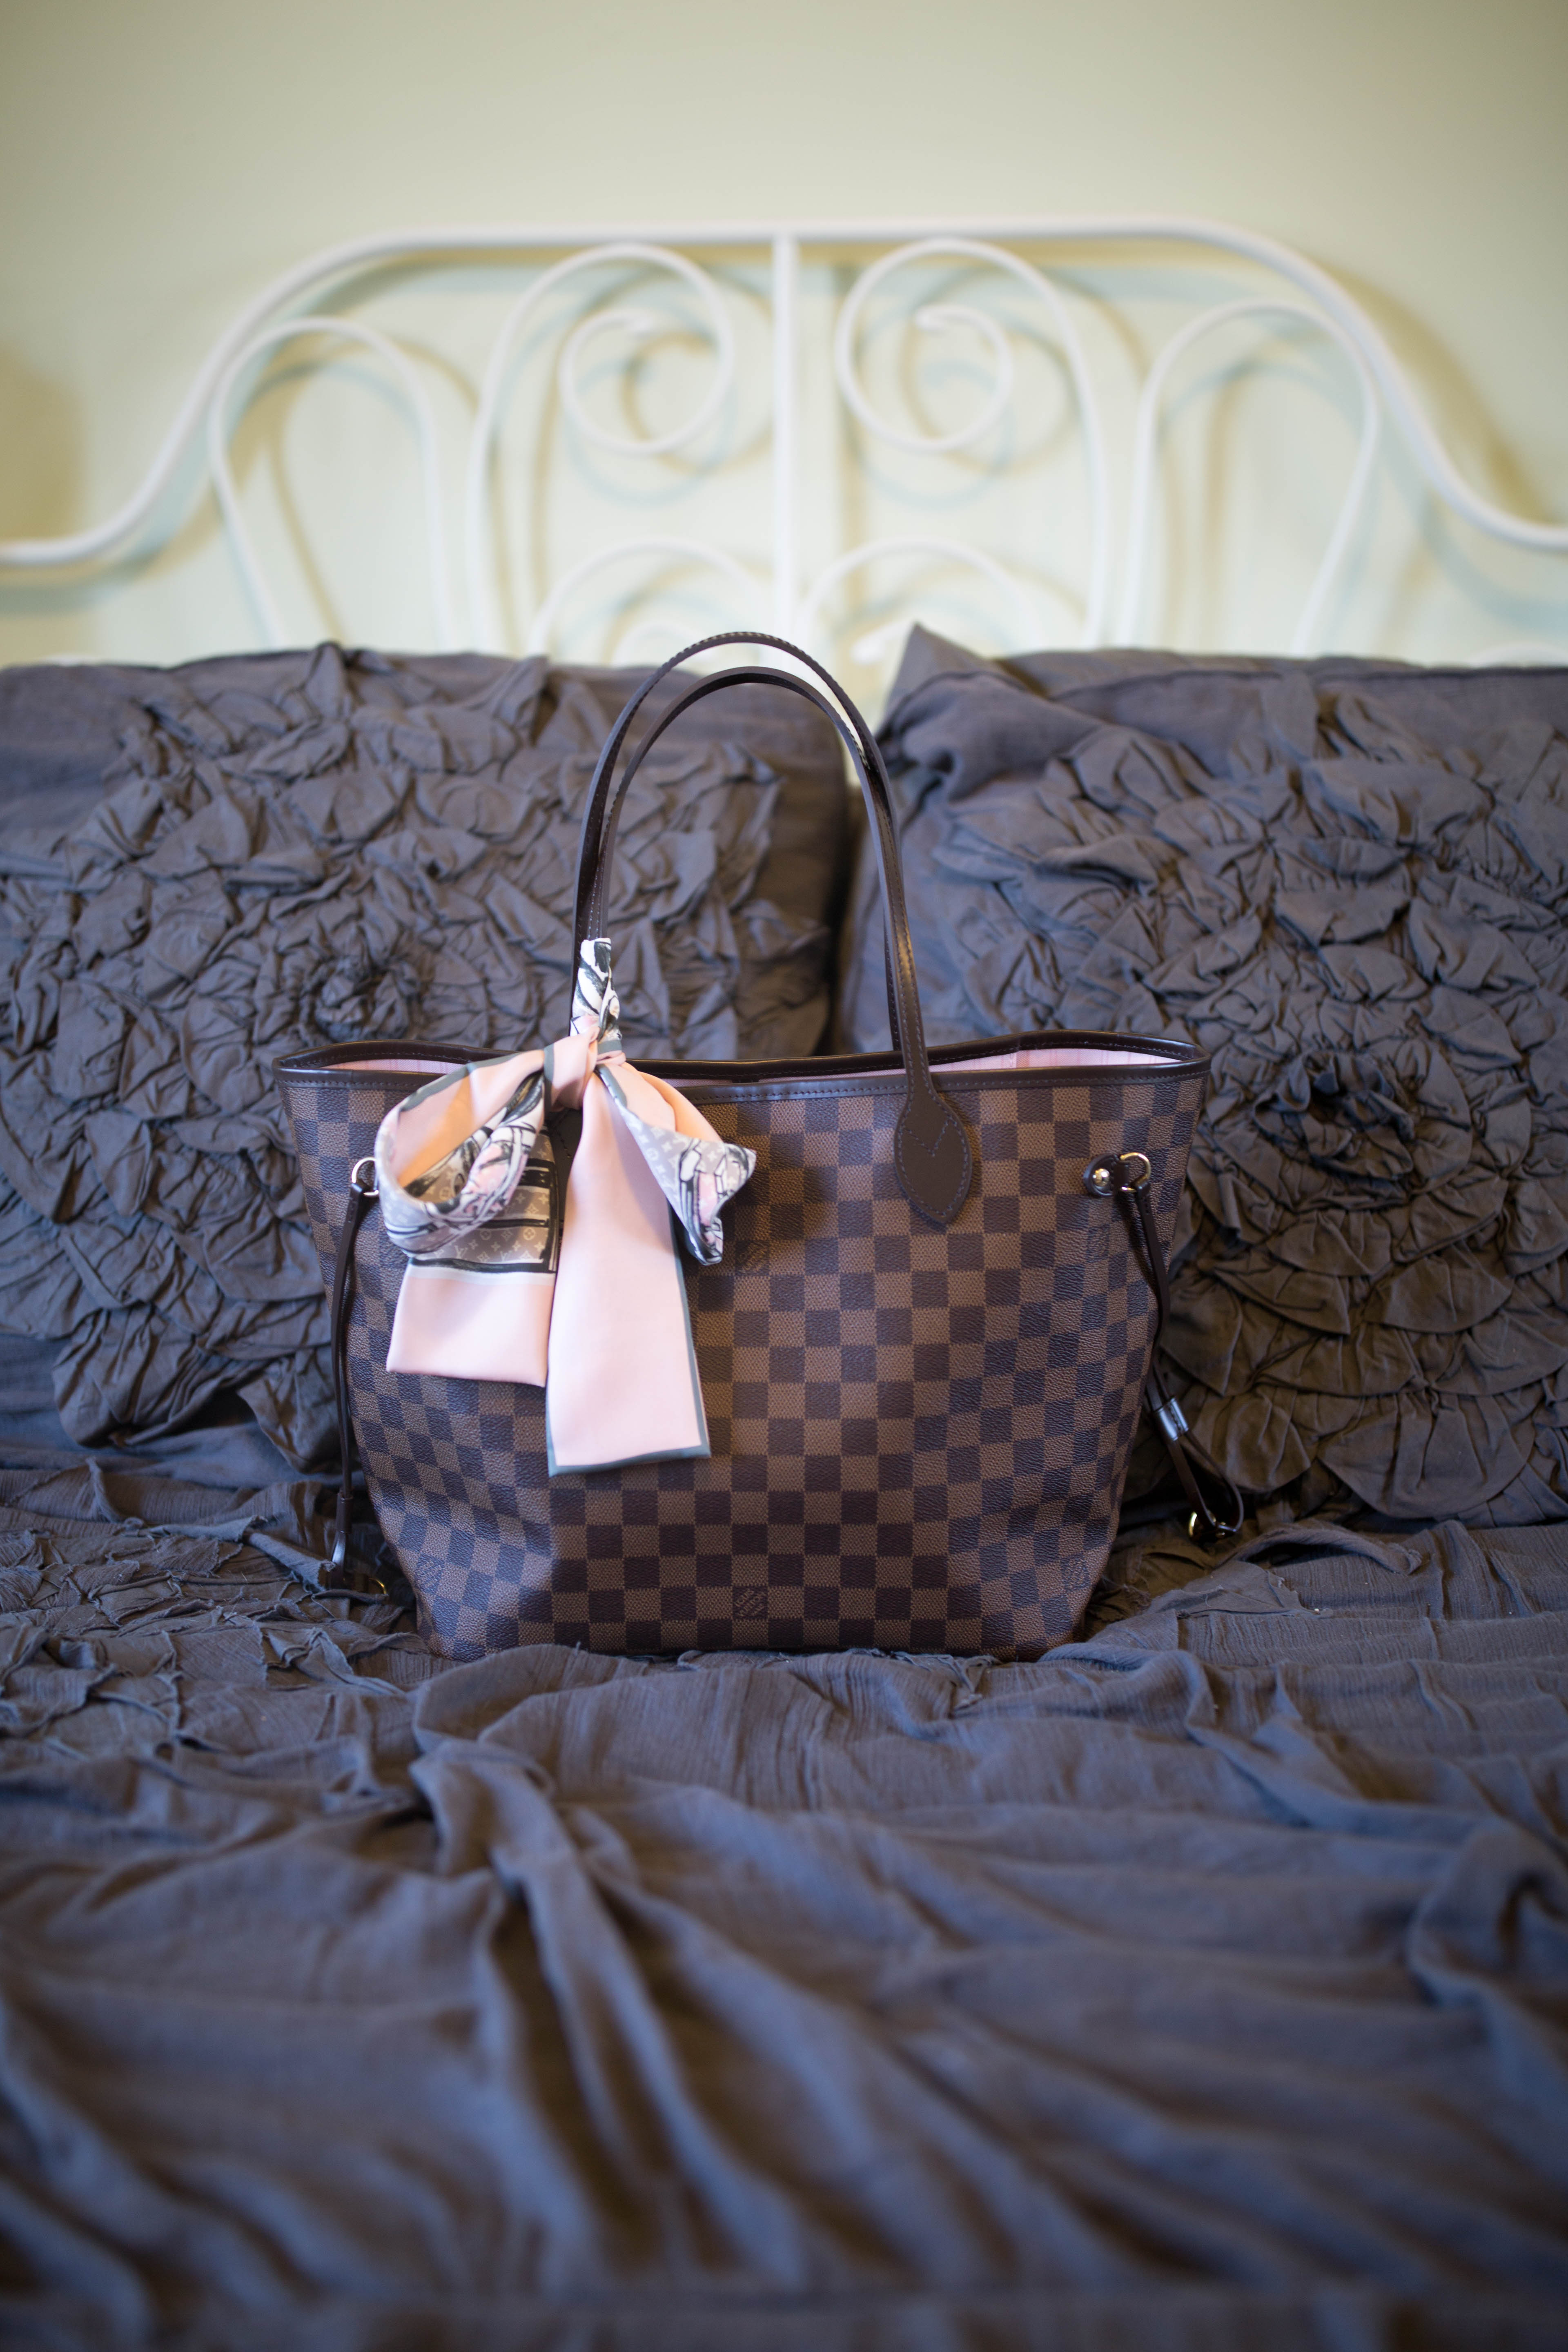 Why Your First Luxury Bag Should be a Louis Vuitton